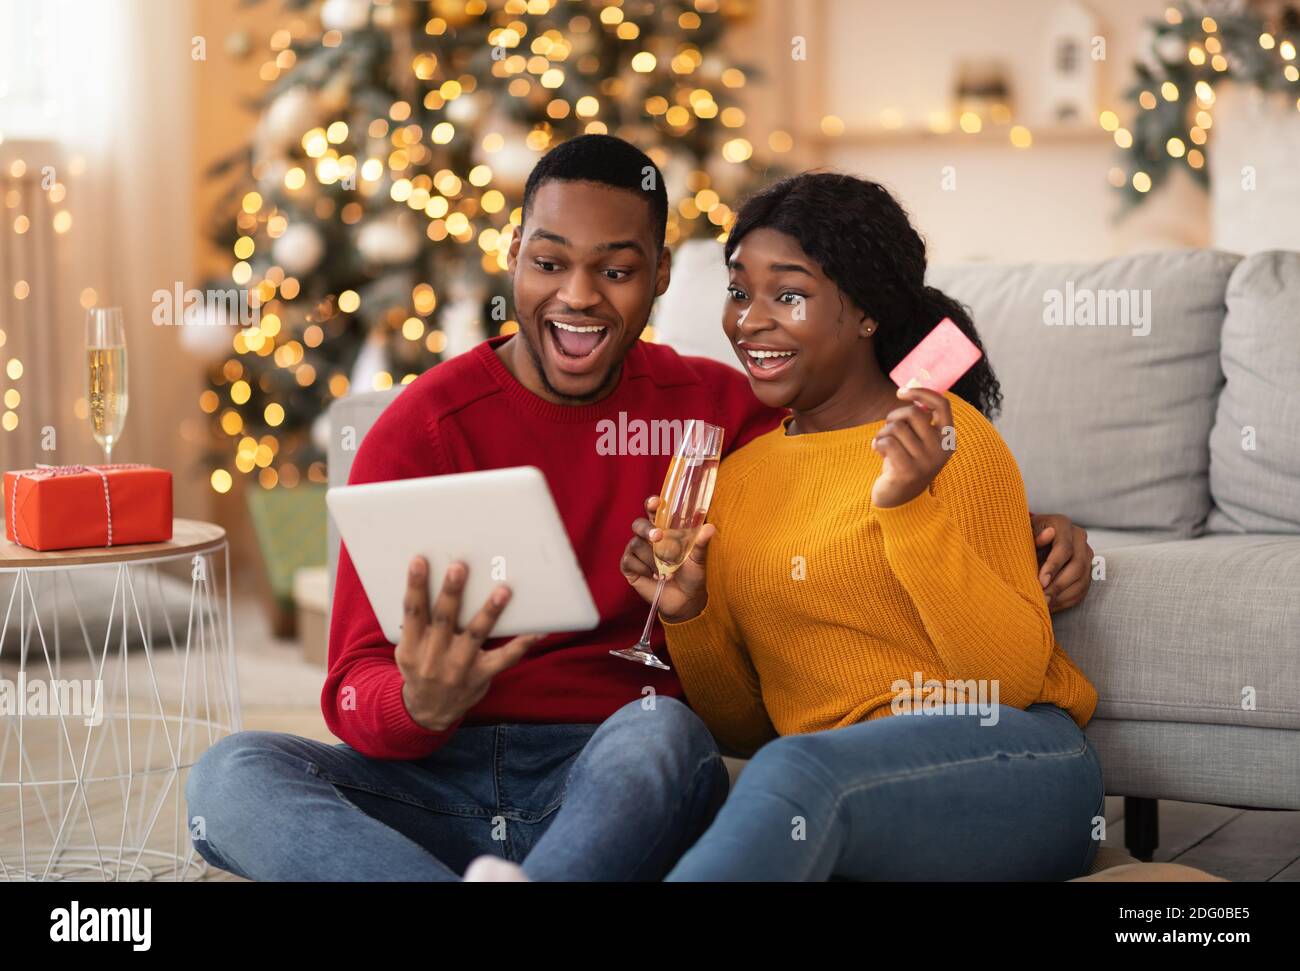 Gifts from shops, online shopping and Christmas celebration Stock Photo